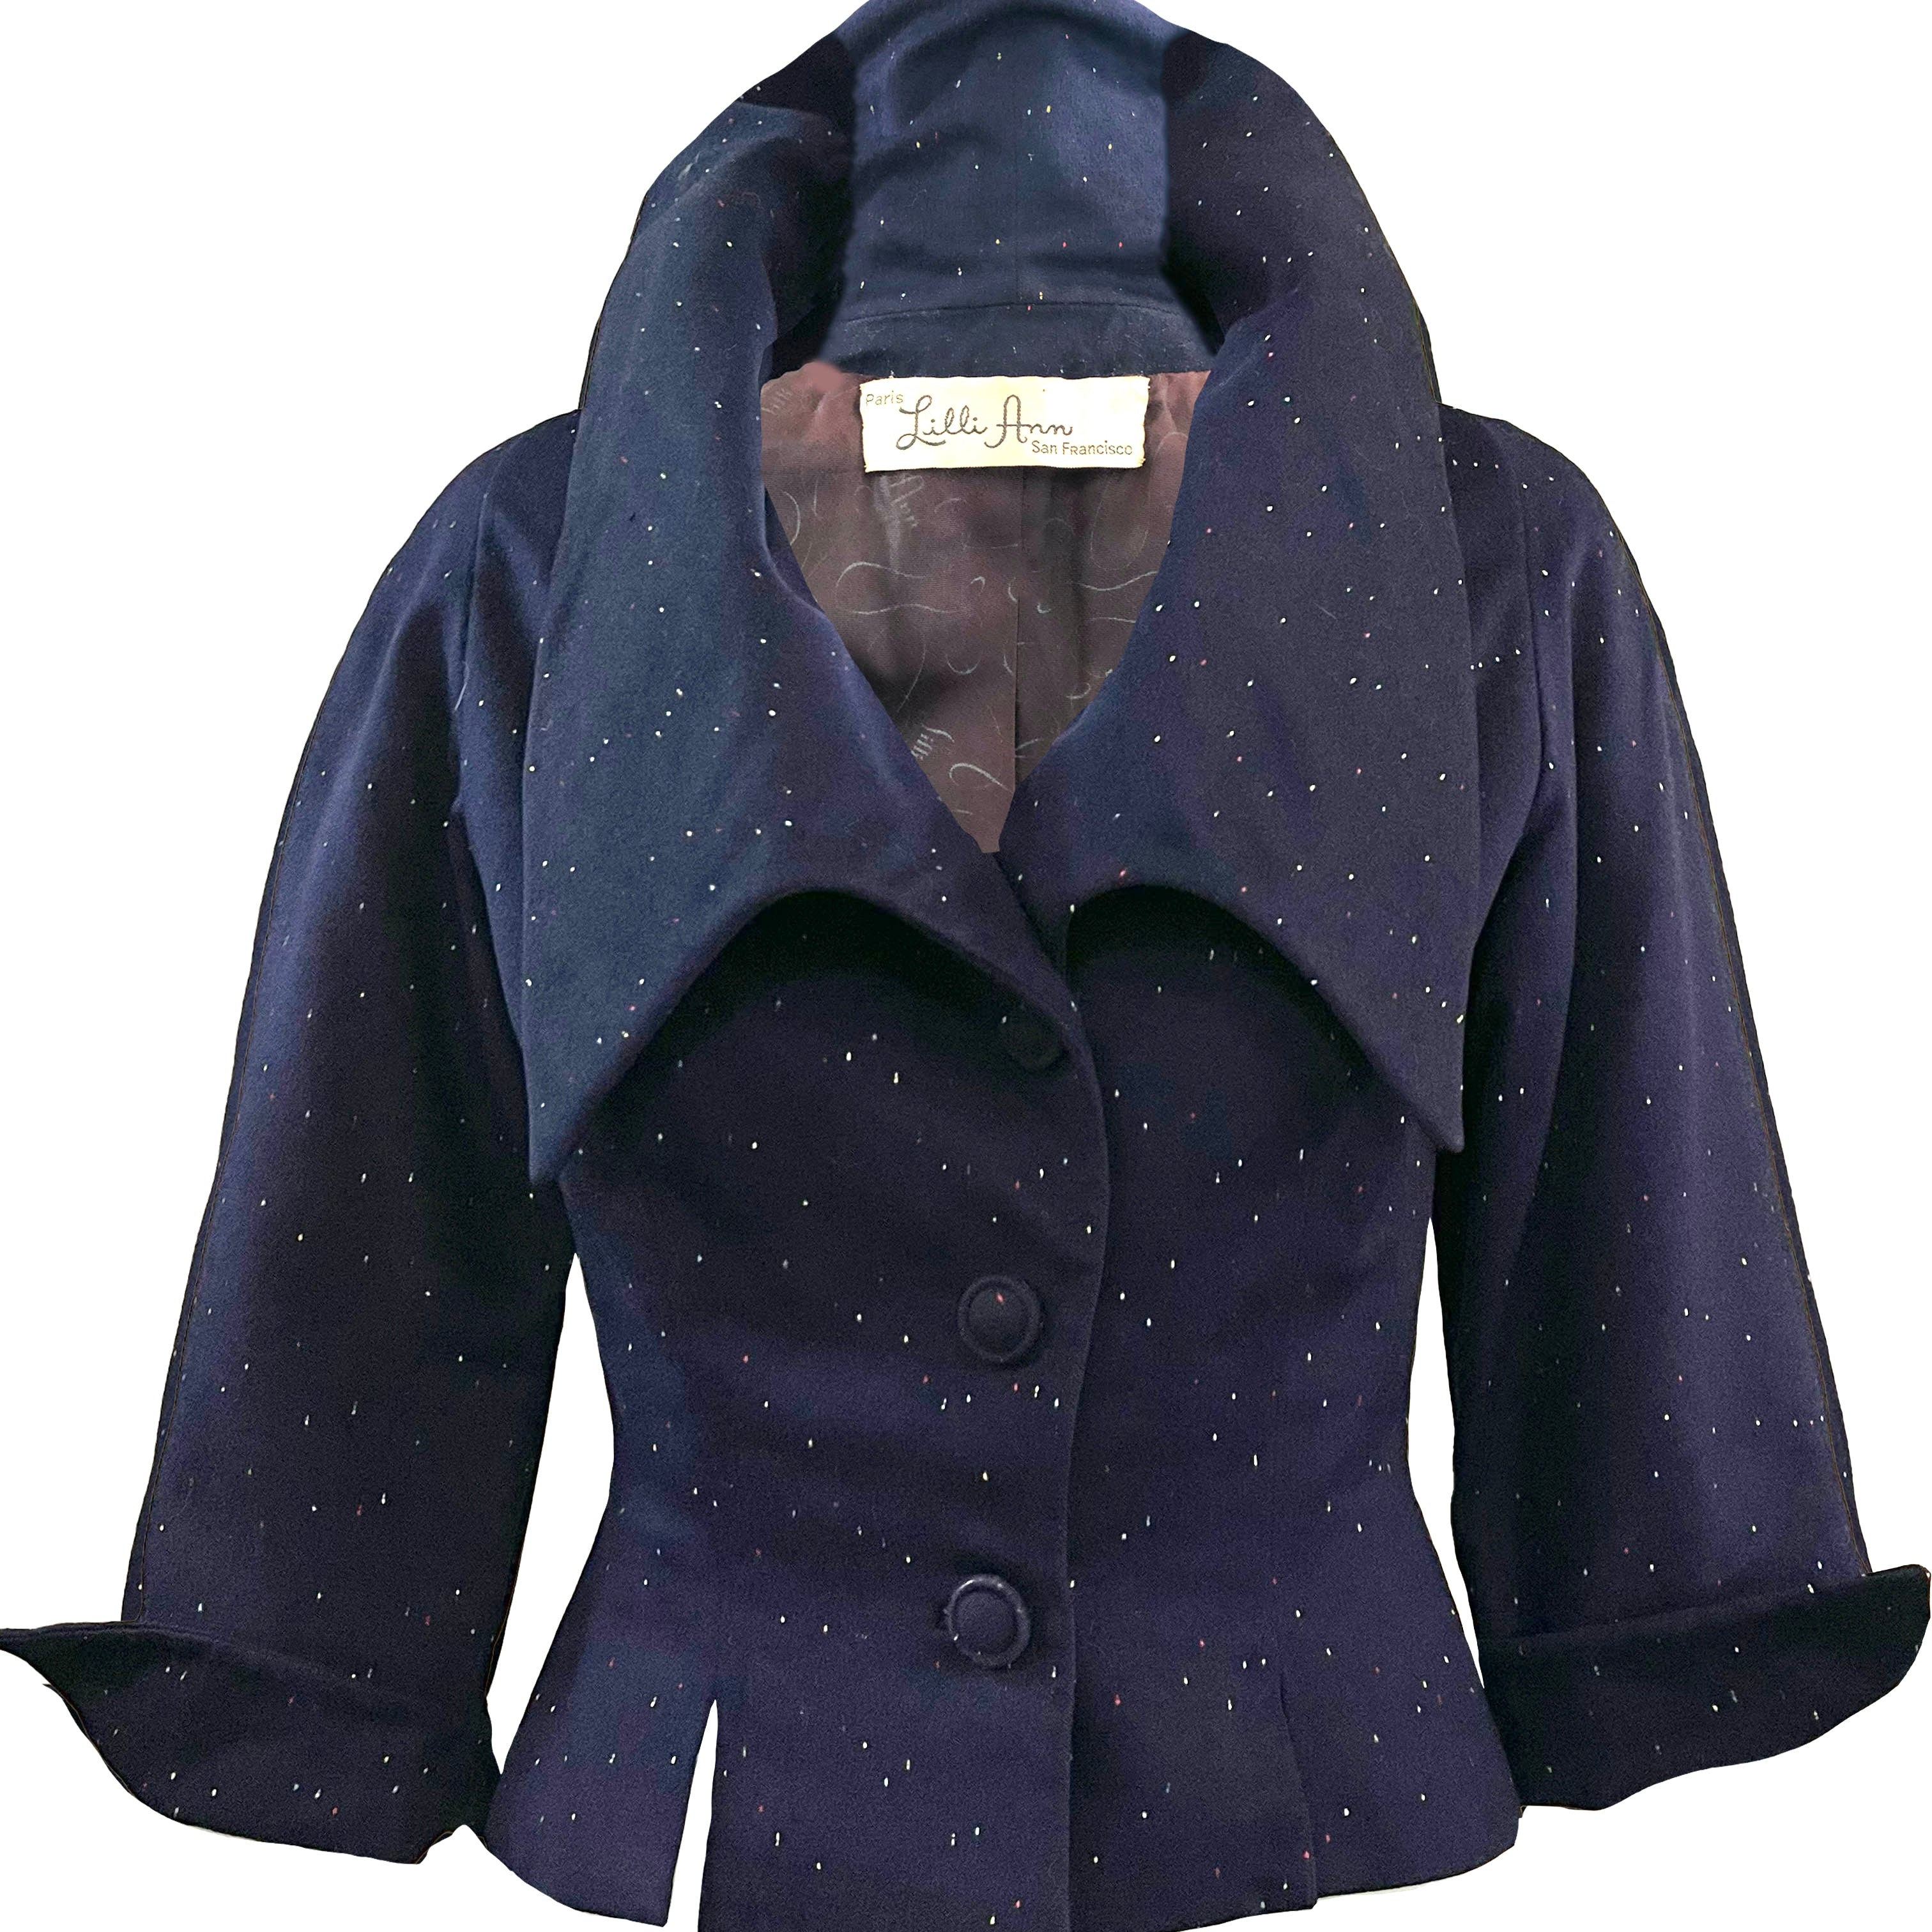 Lilli Ann 50s Blue Wool Rainbow Speckled Jacket FRONT COLLAR UP 1 of 8